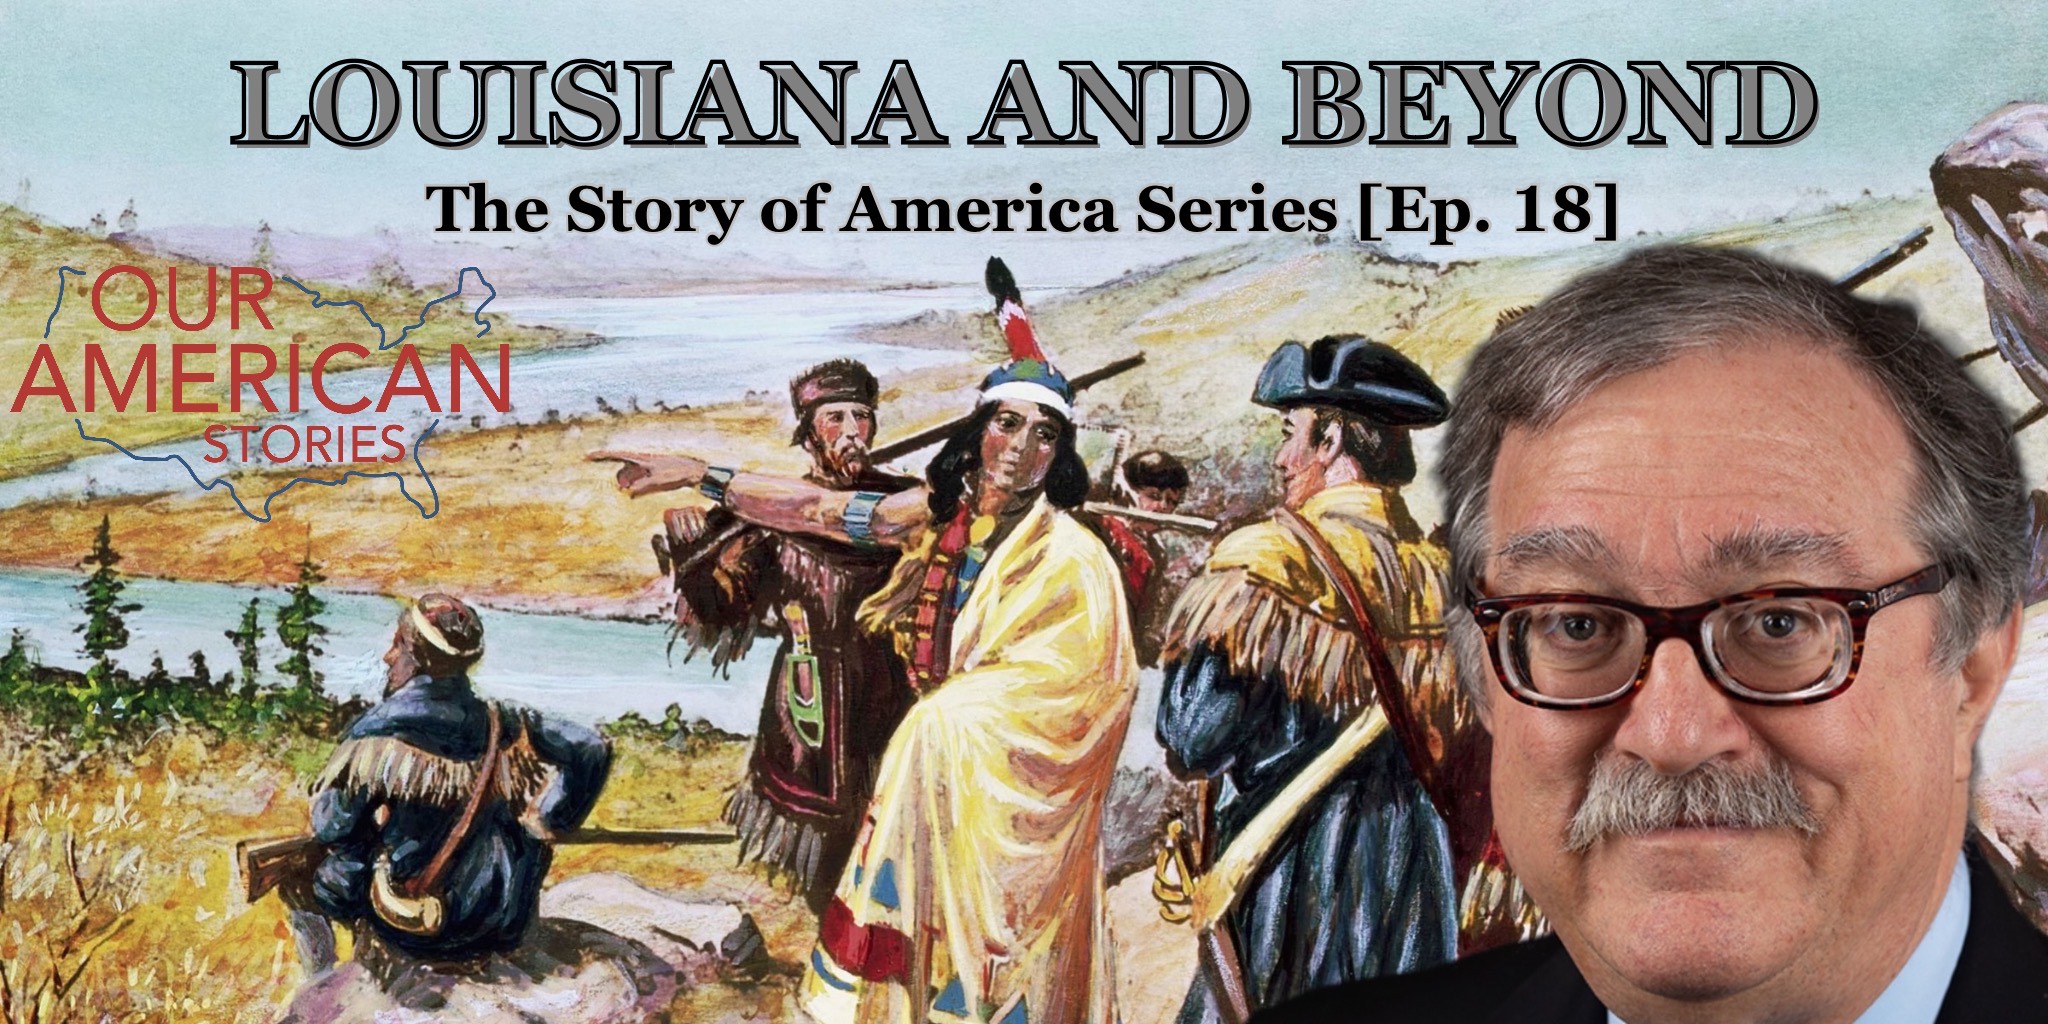 Louisiana and Beyond: The Story of America Series [Ep. 18]